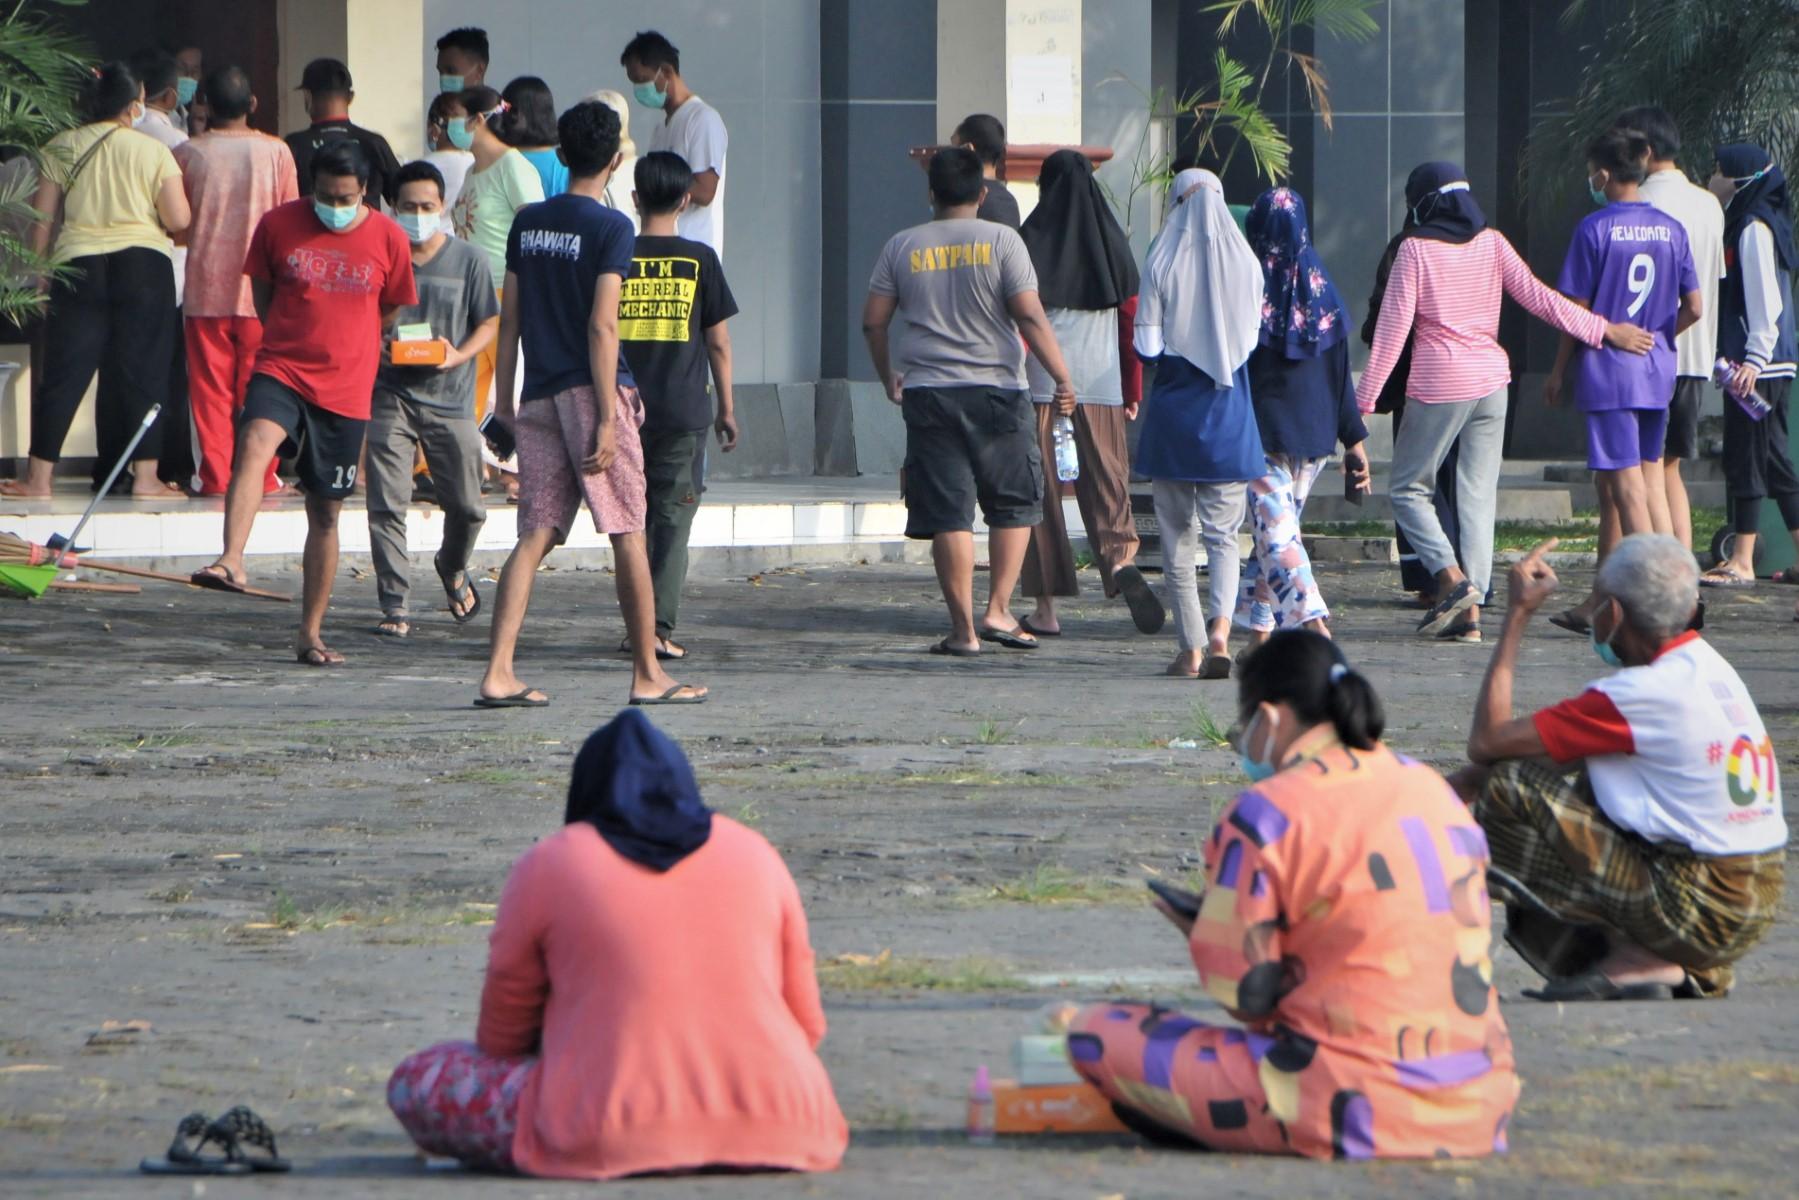 People tested positive for the Covid-19 get some morning sun in the courtyard of an isolation centre in Boyolali, Central Java on July 16, 2021. Photo: AFP